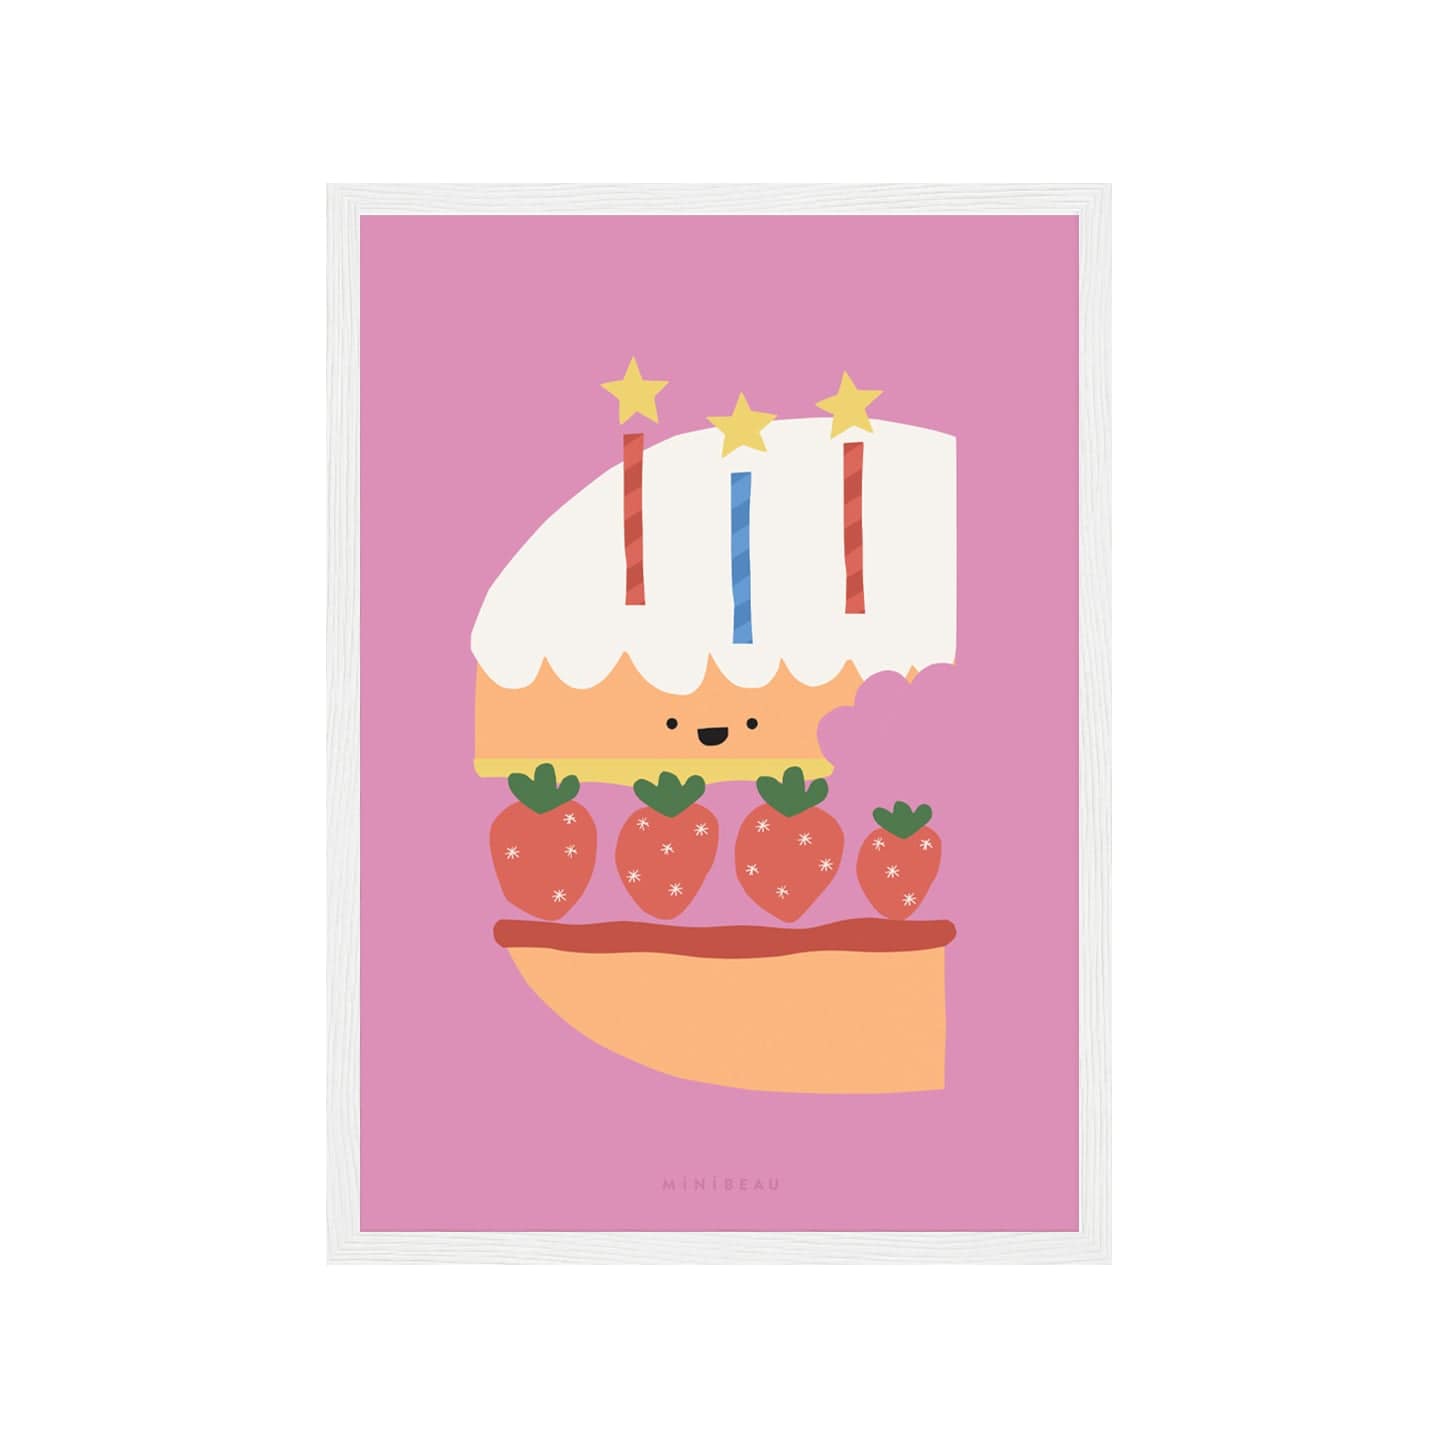 Art print in a white frame. Our Happy Alphabet 'C' Art Print shows a layered cake in the shape of a C, with a layer of cake, then jam, then strawberries, then cream, then cake then white icing, with 3 candles, 2 red, 2 blue, with stars for flames, on a pink background.